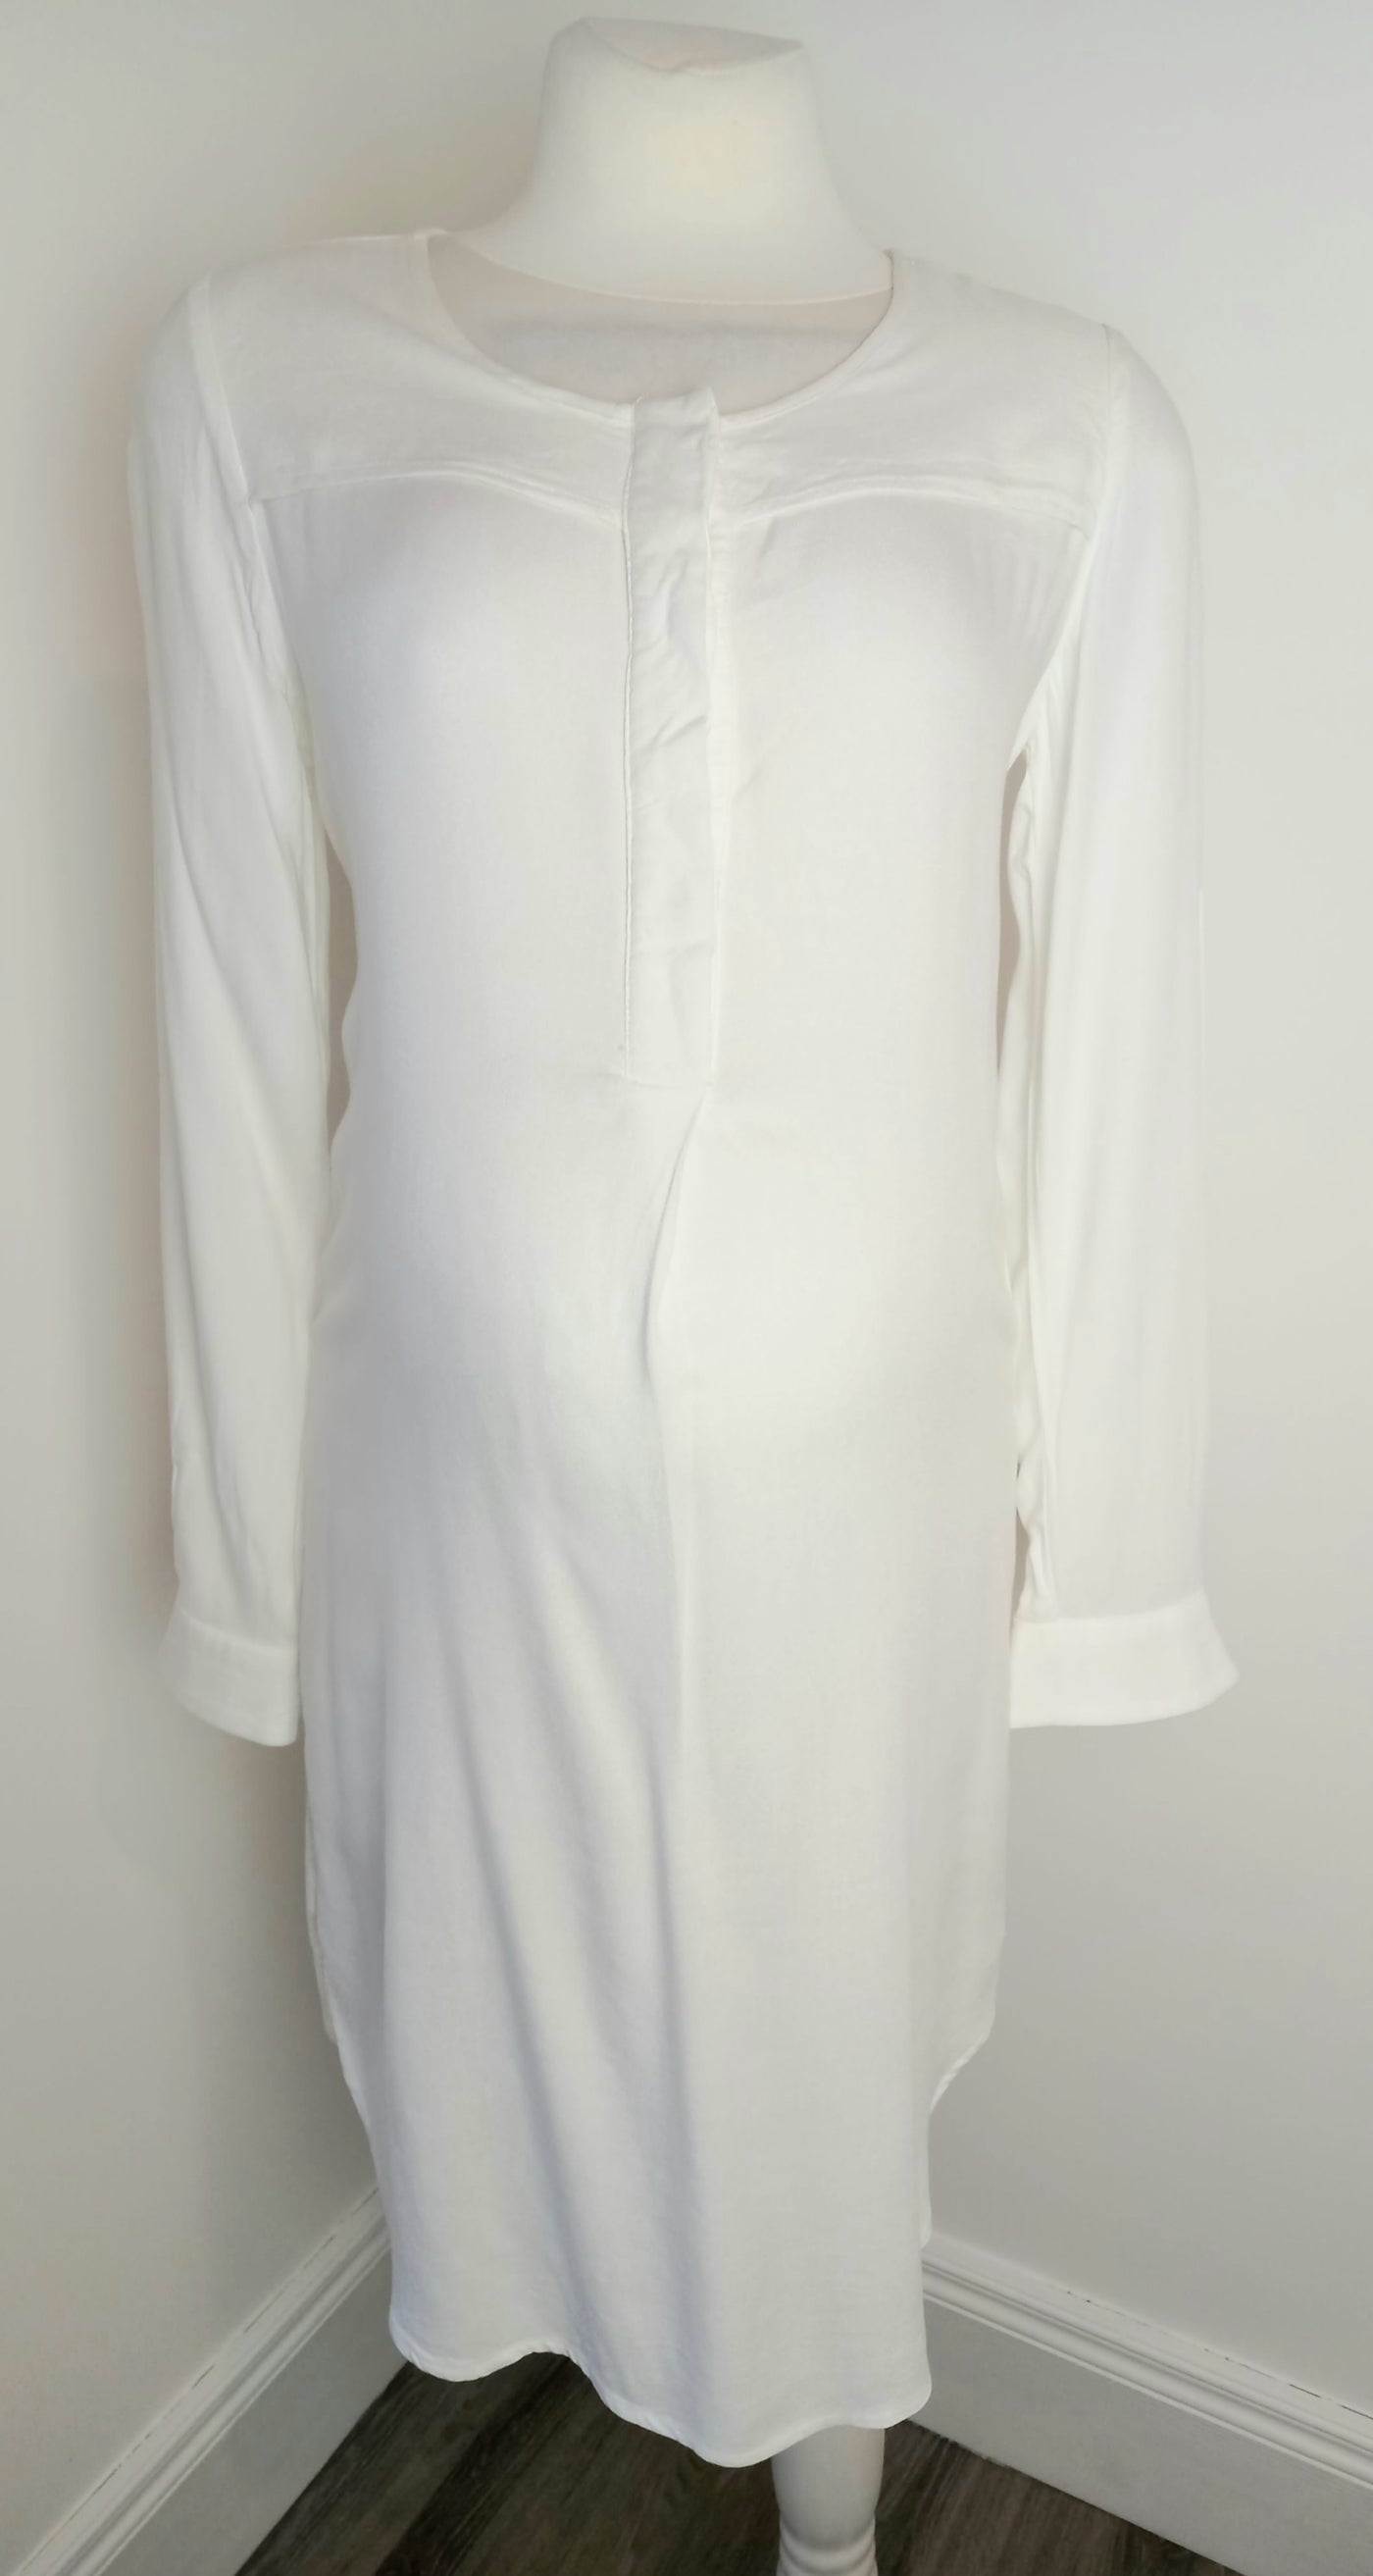 Seraphine White woven maternity shirt dress with half button front - Size 8